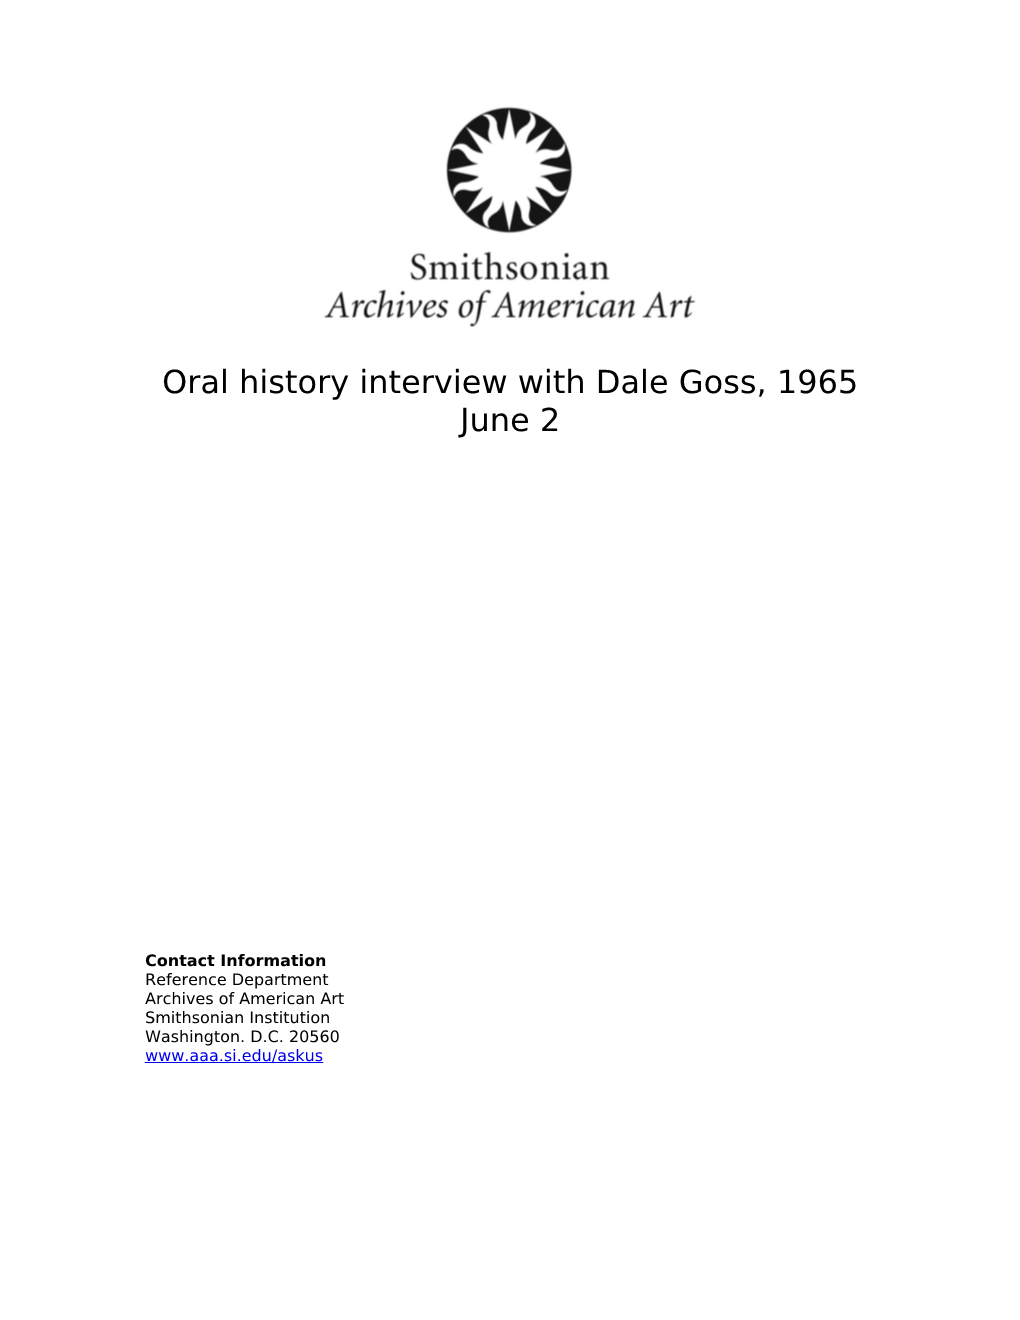 Oral History Interview with Dale Goss, 1965 June 2